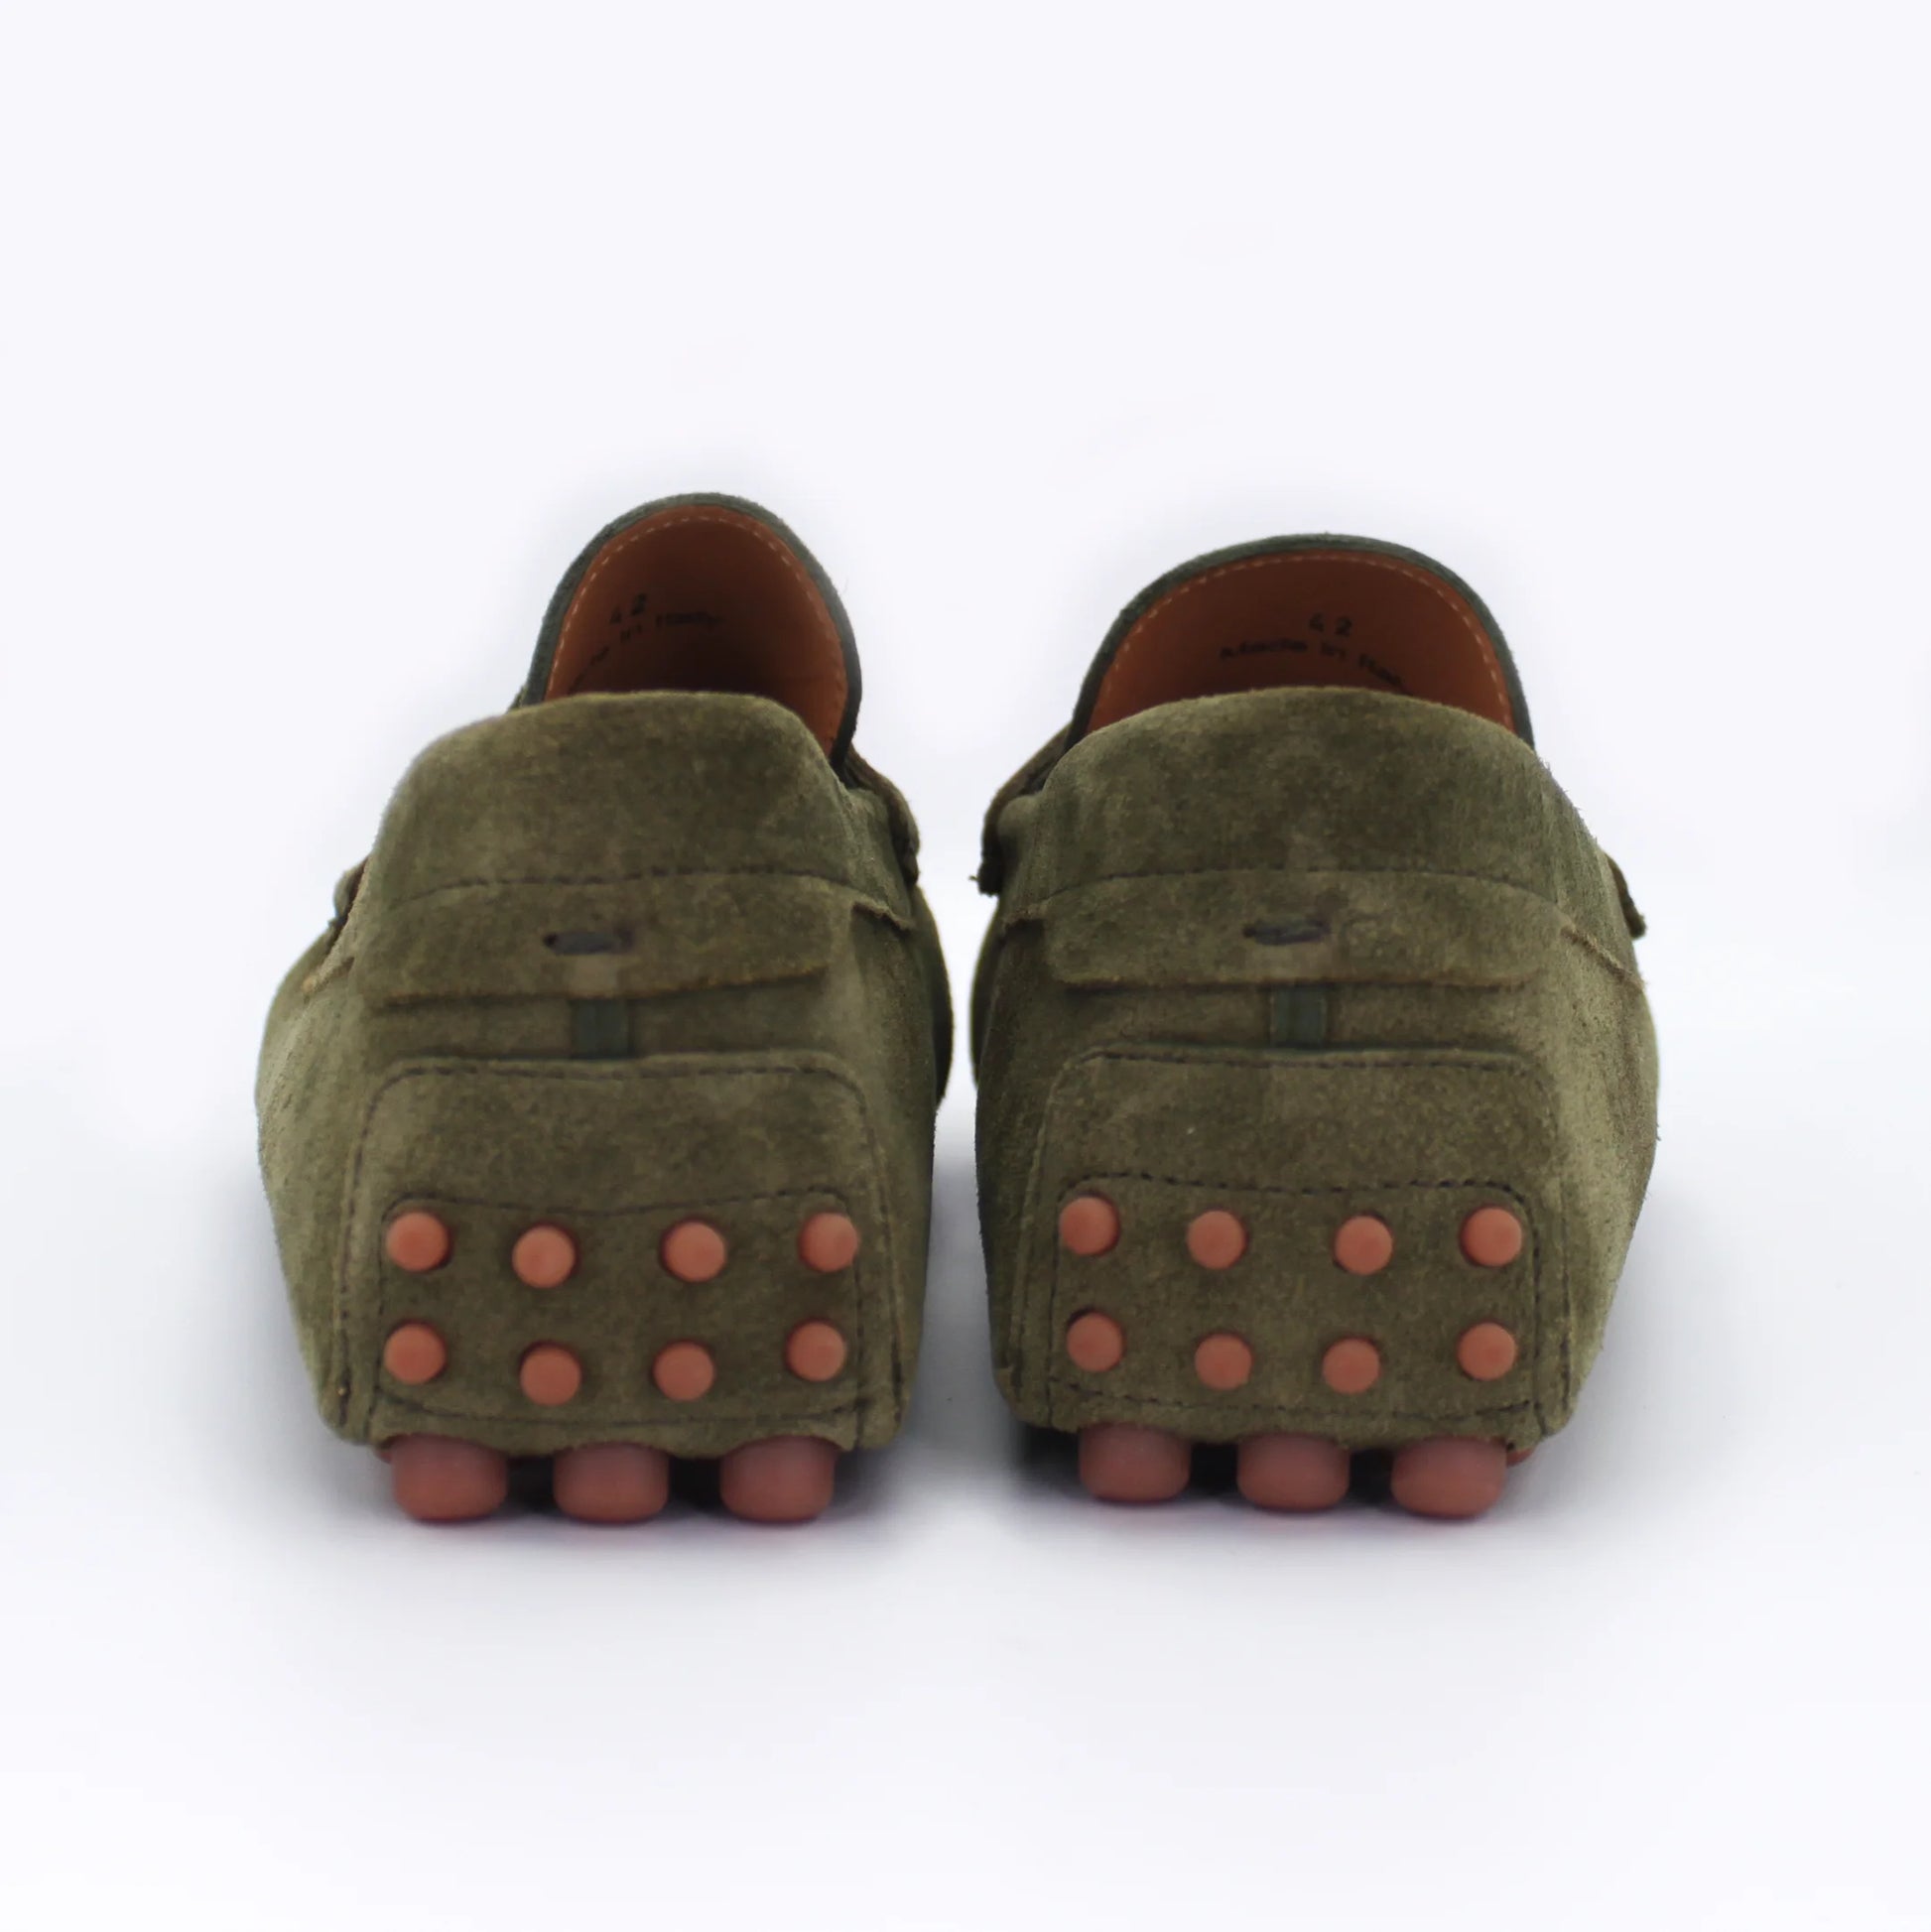 Shop Handmade Italian Suede Driver Moccasin in Asparago Green (u0460002) or browse our range of hand-made Italian moccasins, loafers and drivers for men in leather or suede in-store at Aliverti Durban or Cape Town, or shop online. We deliver in South Africa & offer multiple payment plans as well as accept multiple safe & secure payment methods.